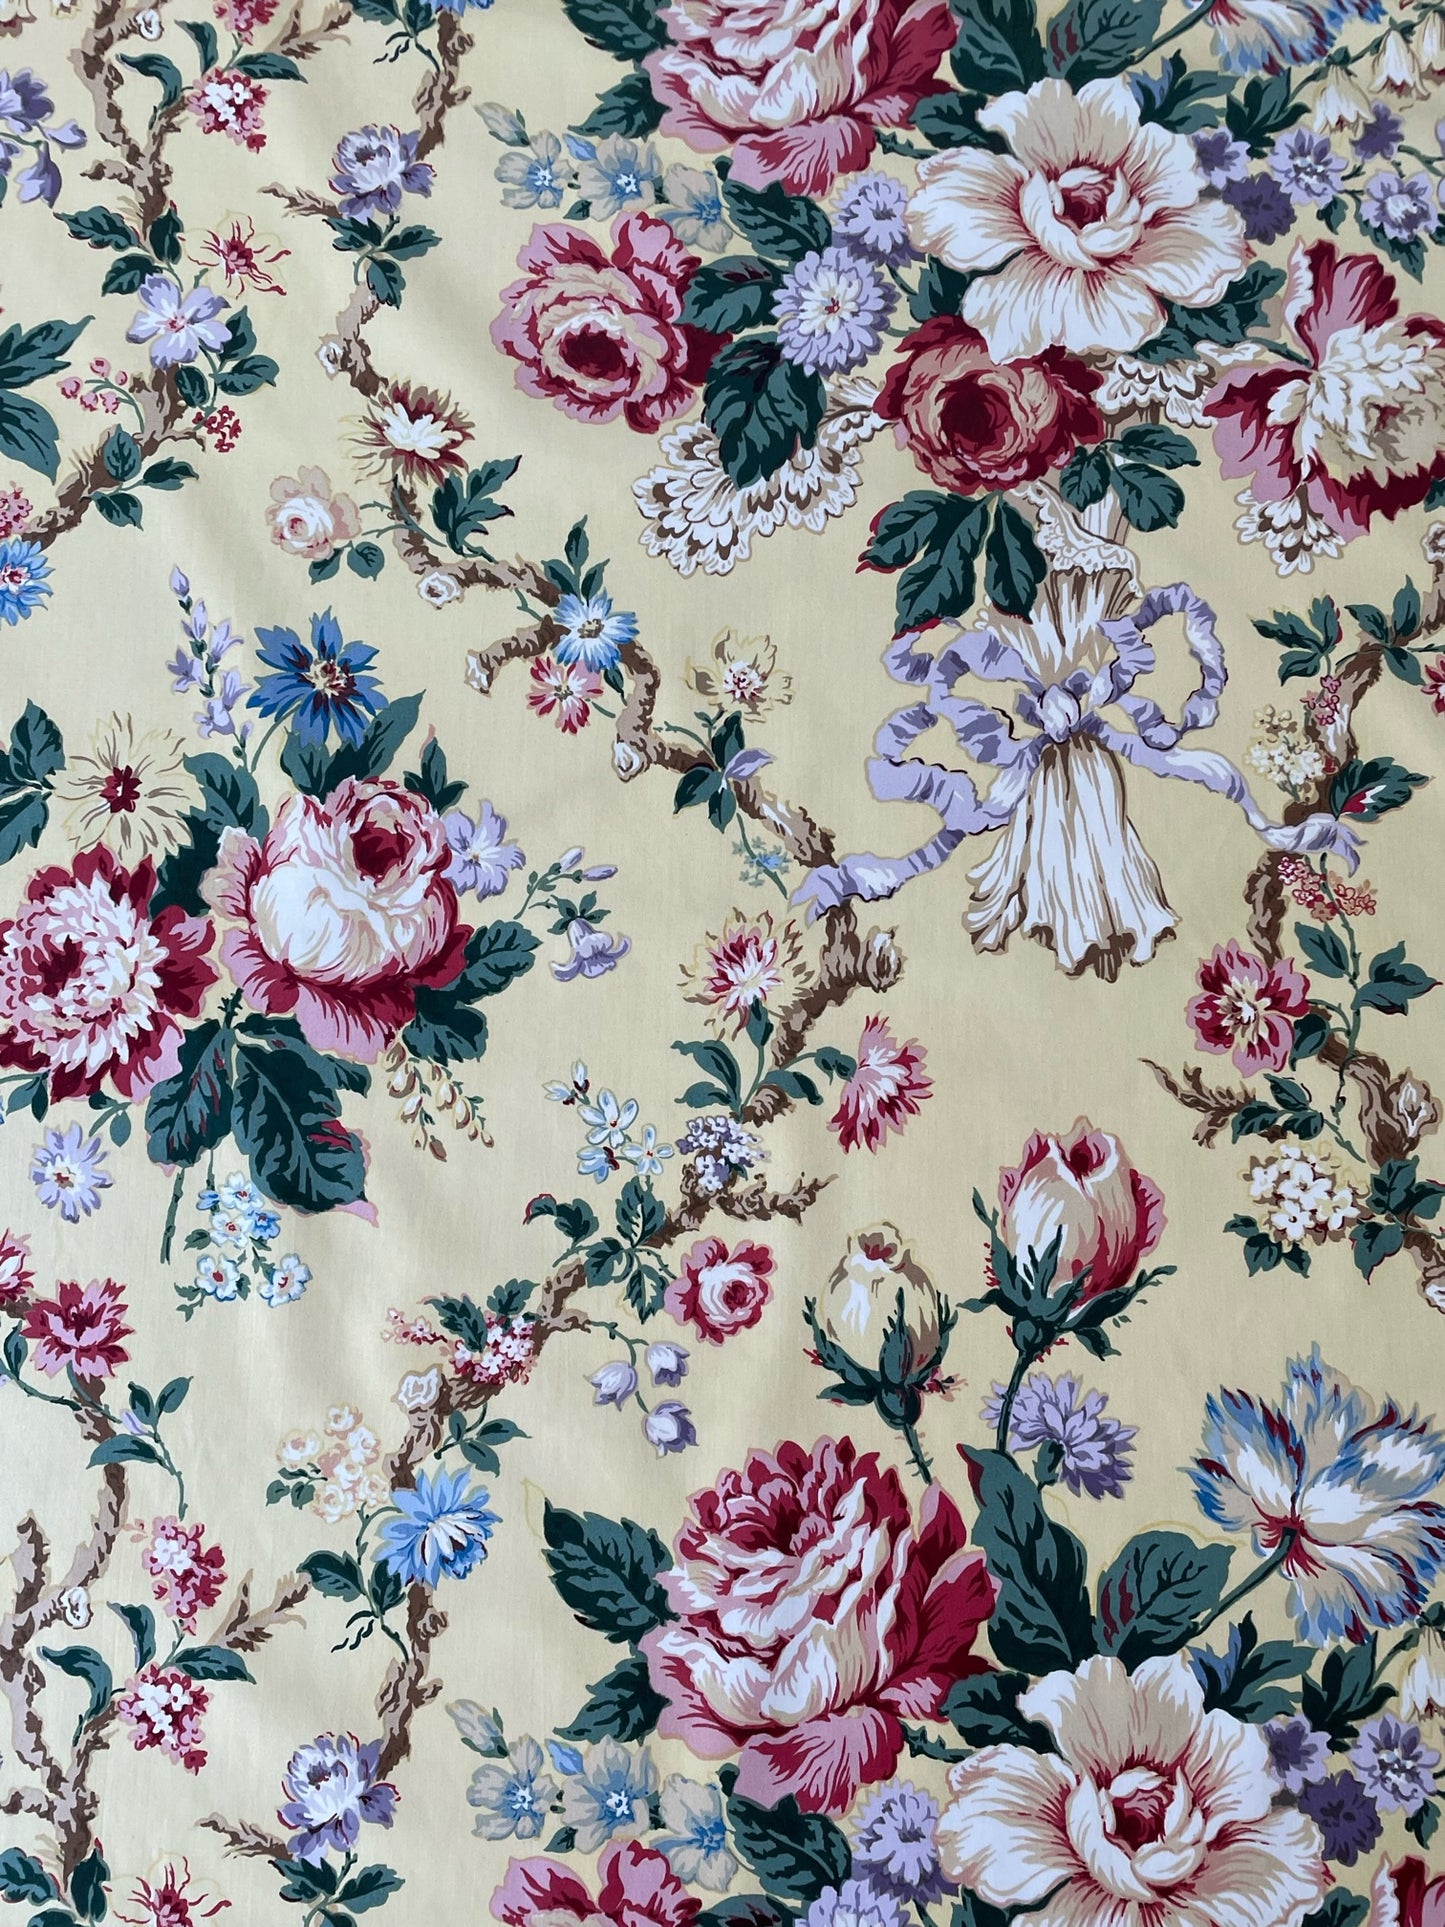 chintz fabric printed with roses, ribbons, and floral vines on a butter yellow background